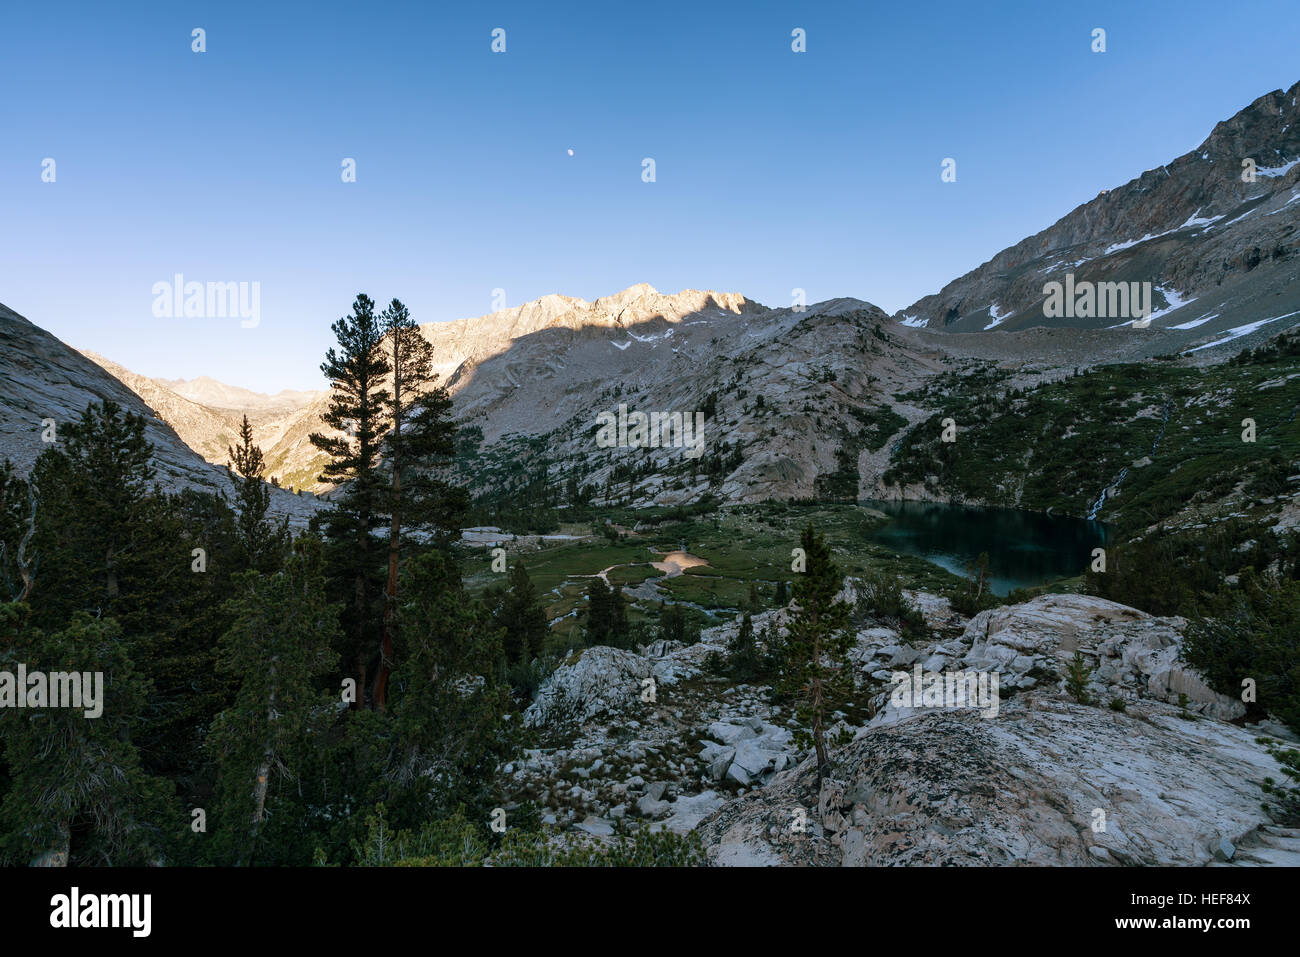 Evening on John Muir Trail, Kings Canyon National Park, California, United States of America, North America Stock Photo